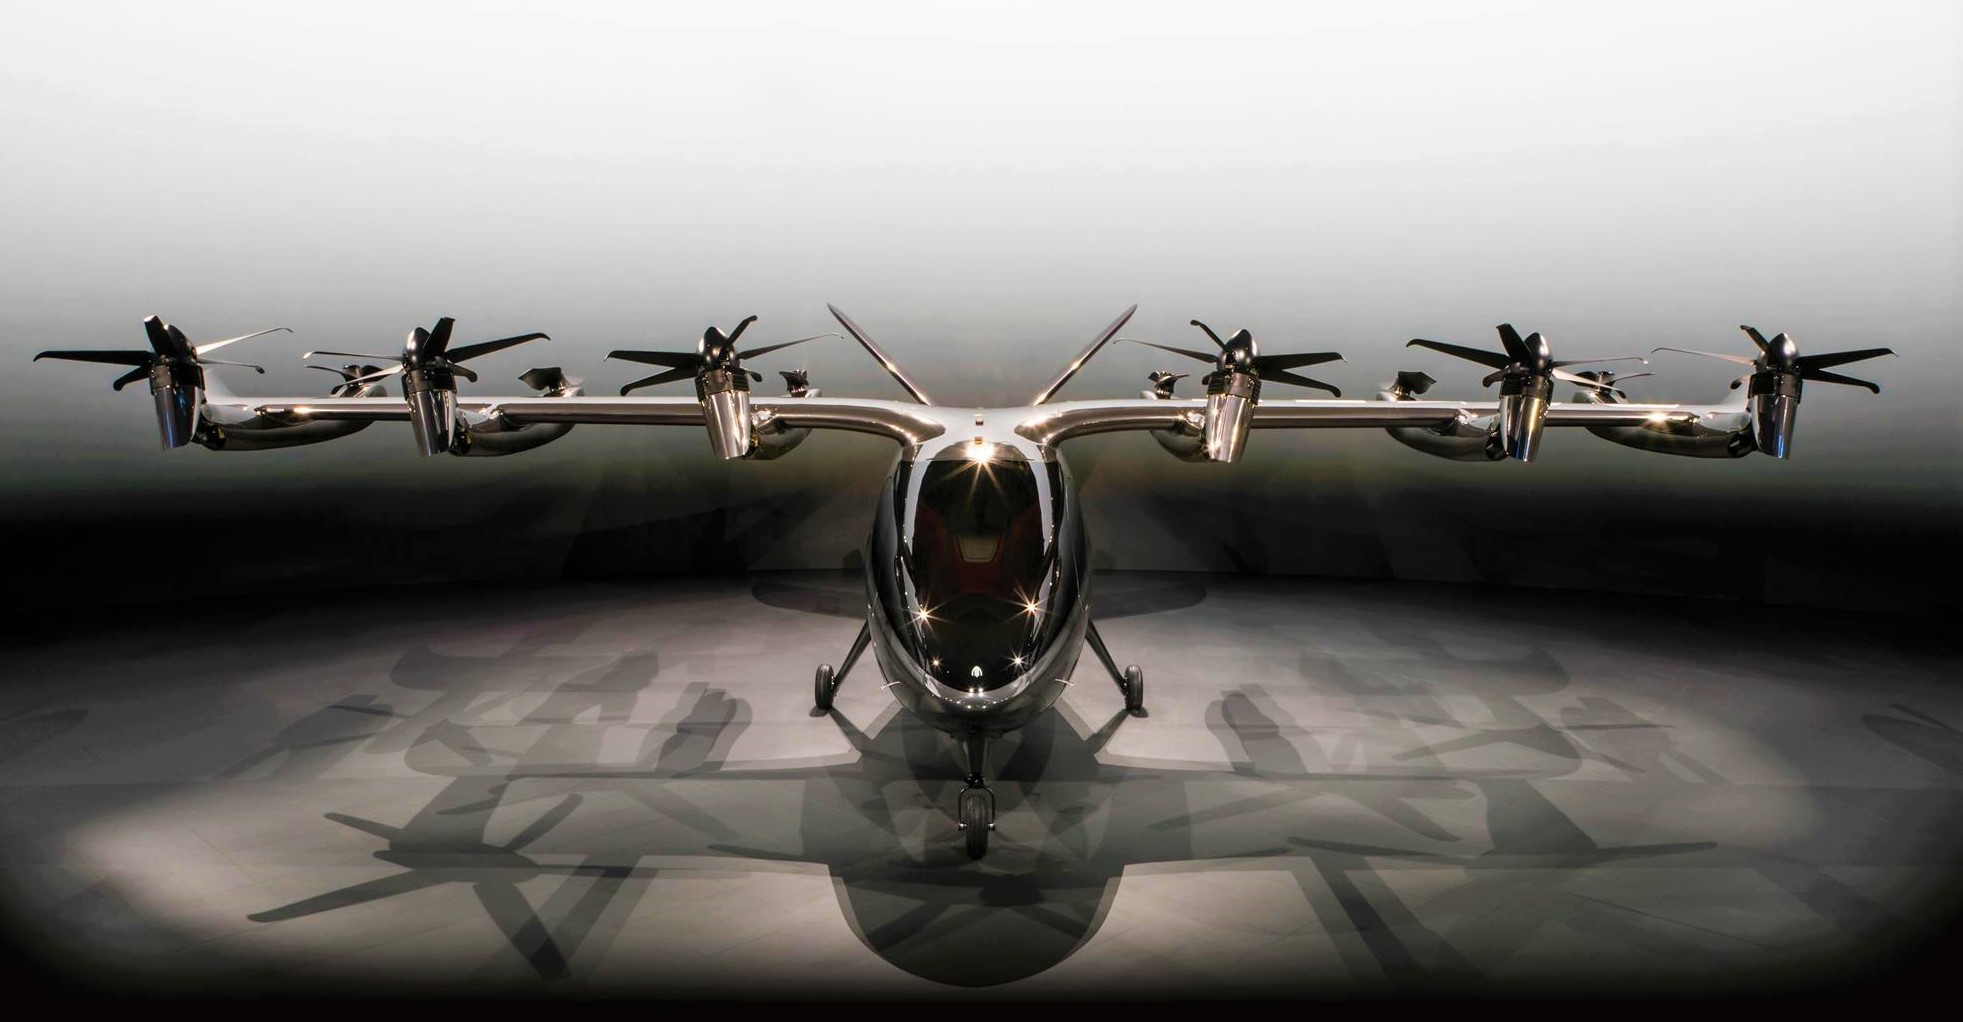 Why did eVTOL Aircraft Maker 'Archer Aviation' sued Boeing backed 'Wisk Aero' for $1 billion in damages ?